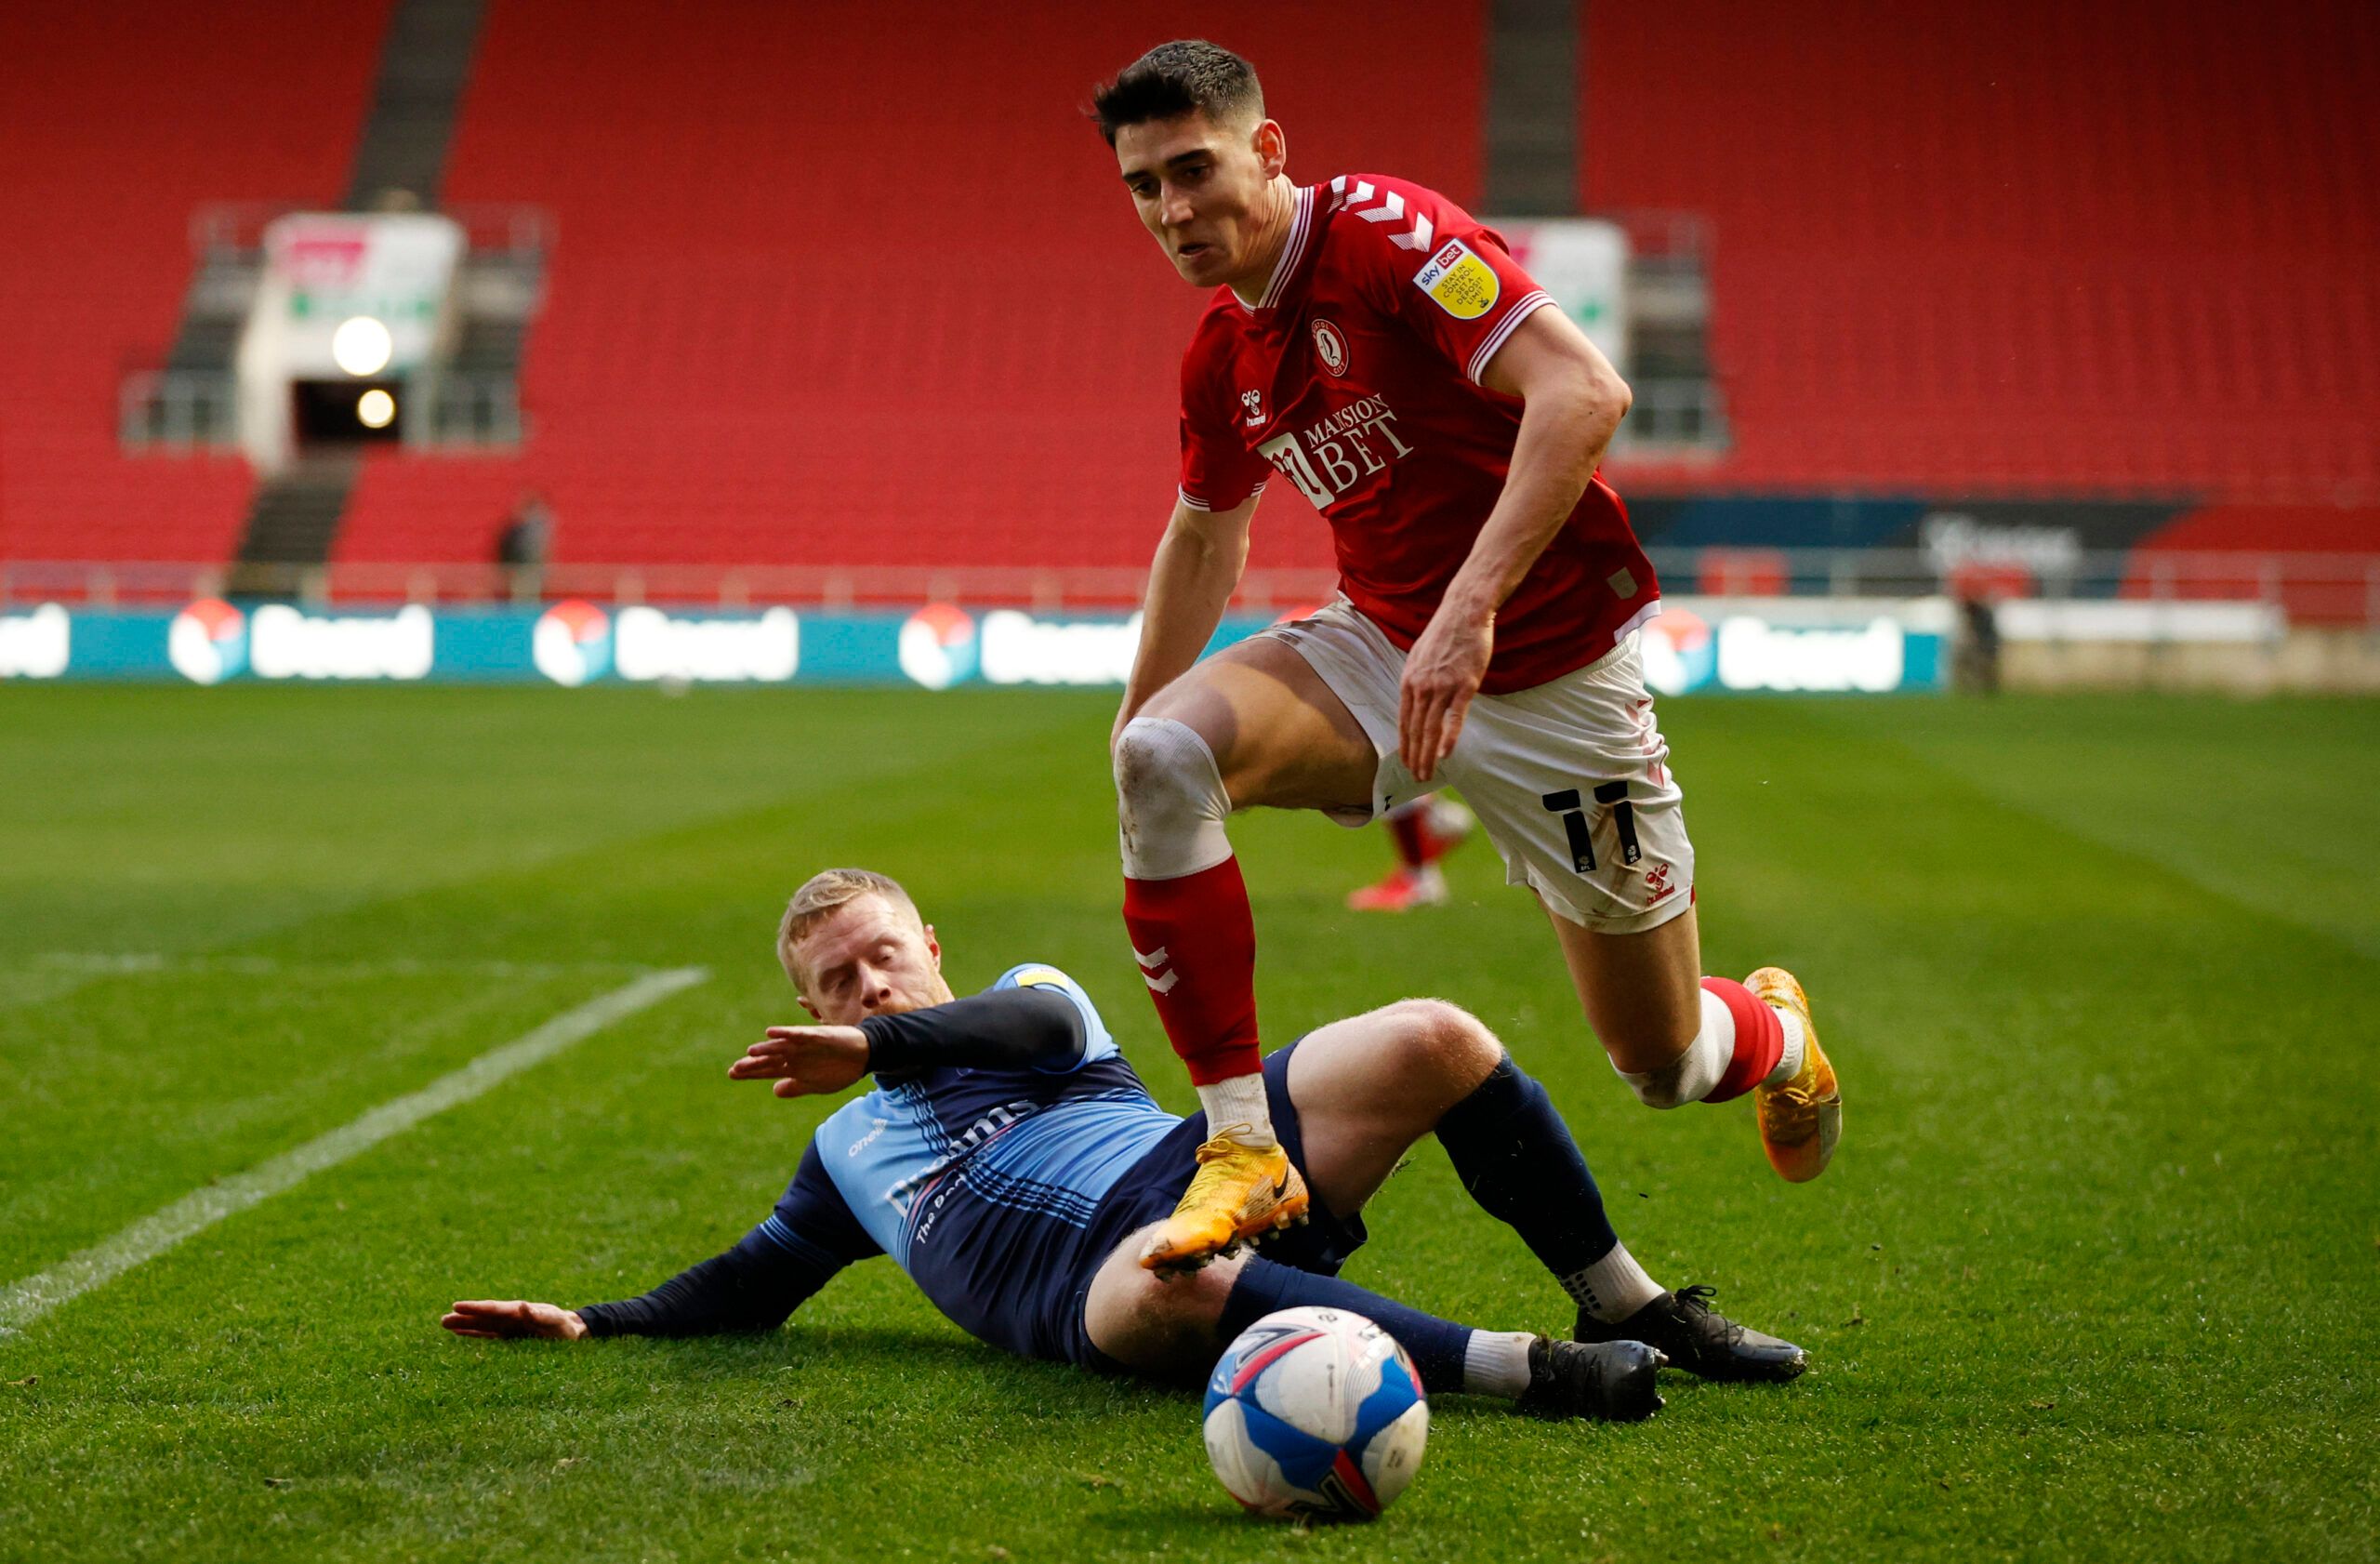 Soccer Football - Championship - Bristol City vs Wycombe Wanderers - Ashton Gate, Bristol, Britain - December 26, 2020 Bristol City's Callum O’Dowda in action with Wycombe Wanderers’ Daryl Horgan Action Images/John Sibley EDITORIAL USE ONLY. No use with unauthorized audio, video, data, fixture lists, club/league logos or 'live' services. Online in-match use limited to 75 images, no video emulation. No use in betting, games or single club /league/player publications.  Please contact your account 